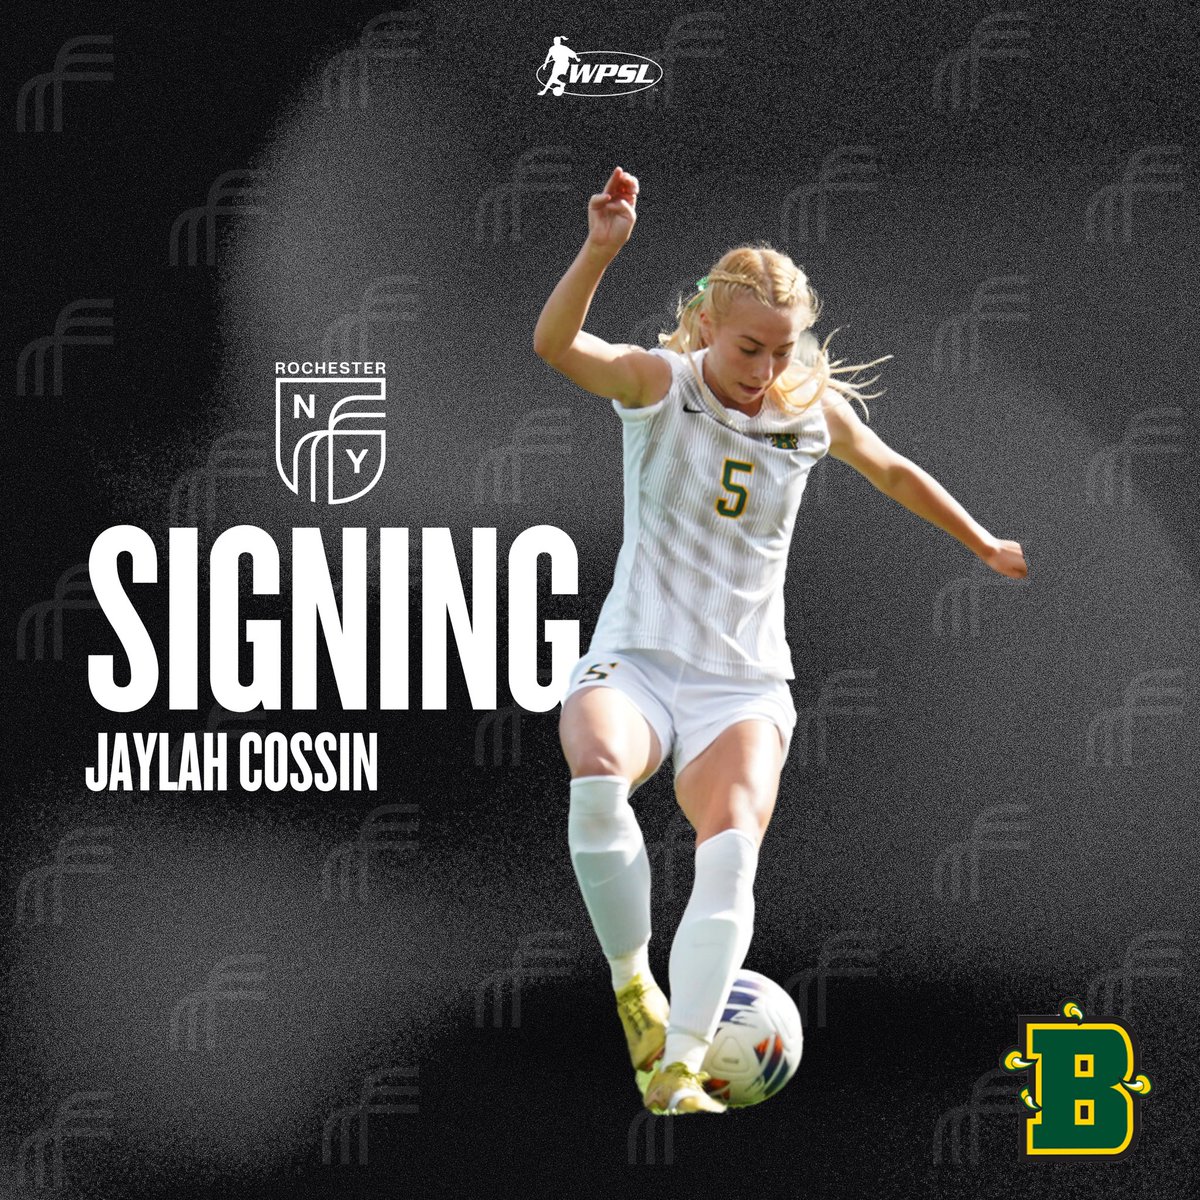 New Signing Alert 💚🖤 Welcome to the team!

Jaylah Cossin | Brockport 

#rnyfcpwpsl #soccer #signing #WPSL #BelieveToAchieve